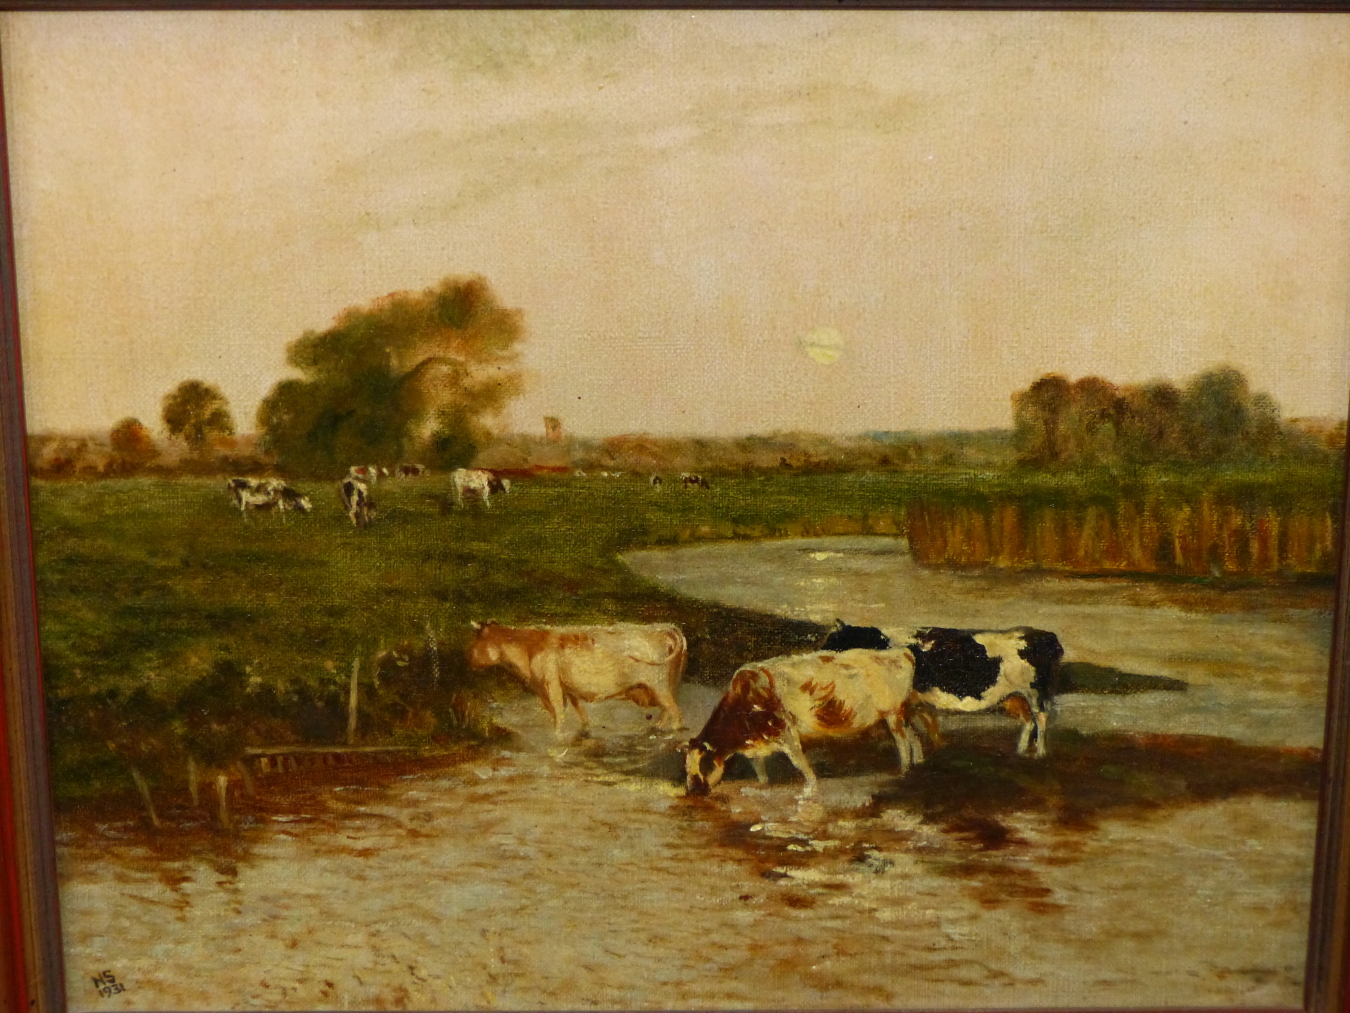 BRITISH SCHOOL (EARLY 20TH CENTURY), CATTLE IN WATER MEADOWS, SIGNED WITH INITIALS NS AND DATED